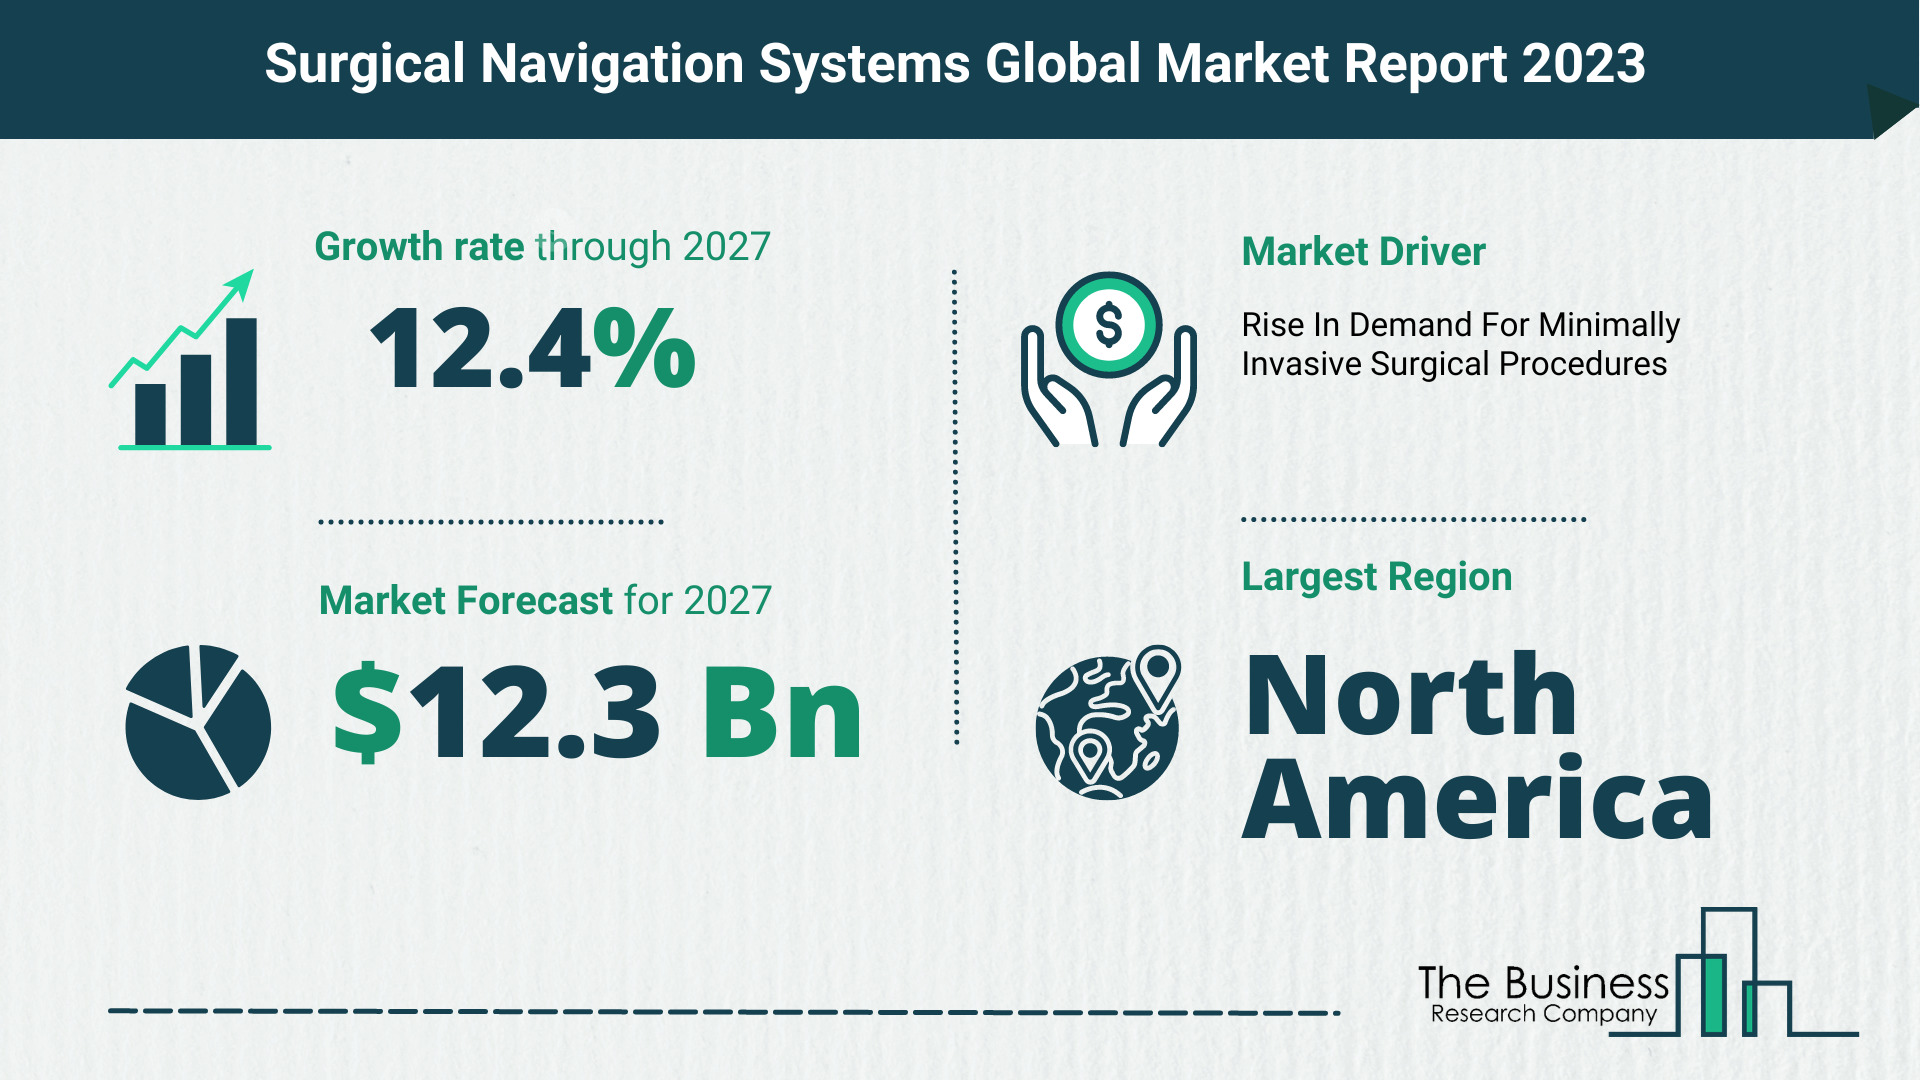 How Will The Surgical Navigation Systems Market Globally Expand In 2023?